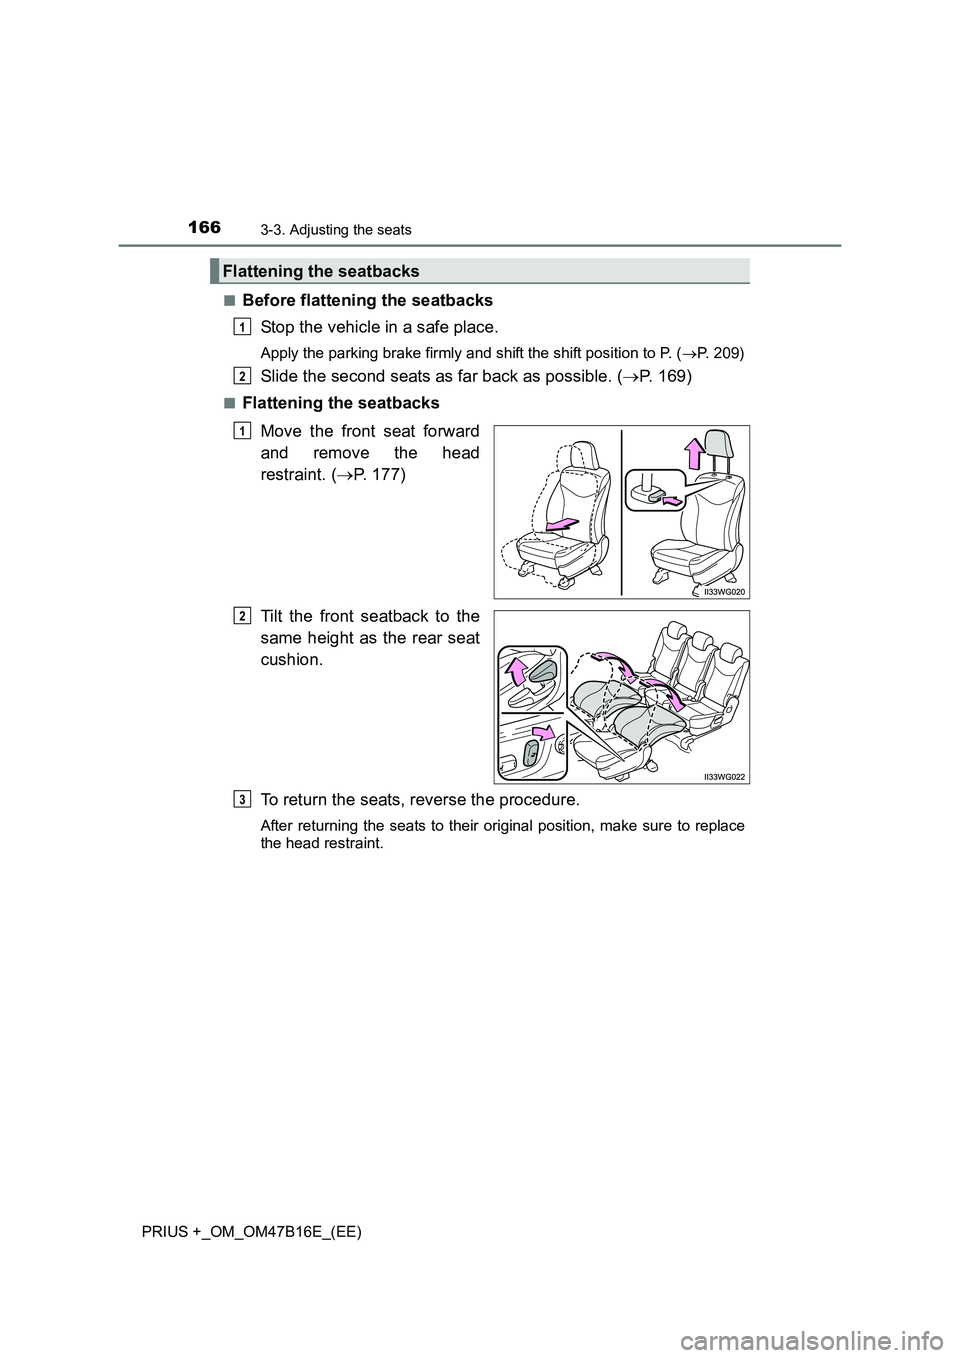 TOYOTA PRIUS PLUS 2015  Owners Manual 1663-3. Adjusting the seats
PRIUS +_OM_OM47B16E_(EE)■
Before flattening the seatbacks
Stop the vehicle in a safe place.
Apply the parking brake firmly and shift the shift position to P. ( →P. 209)